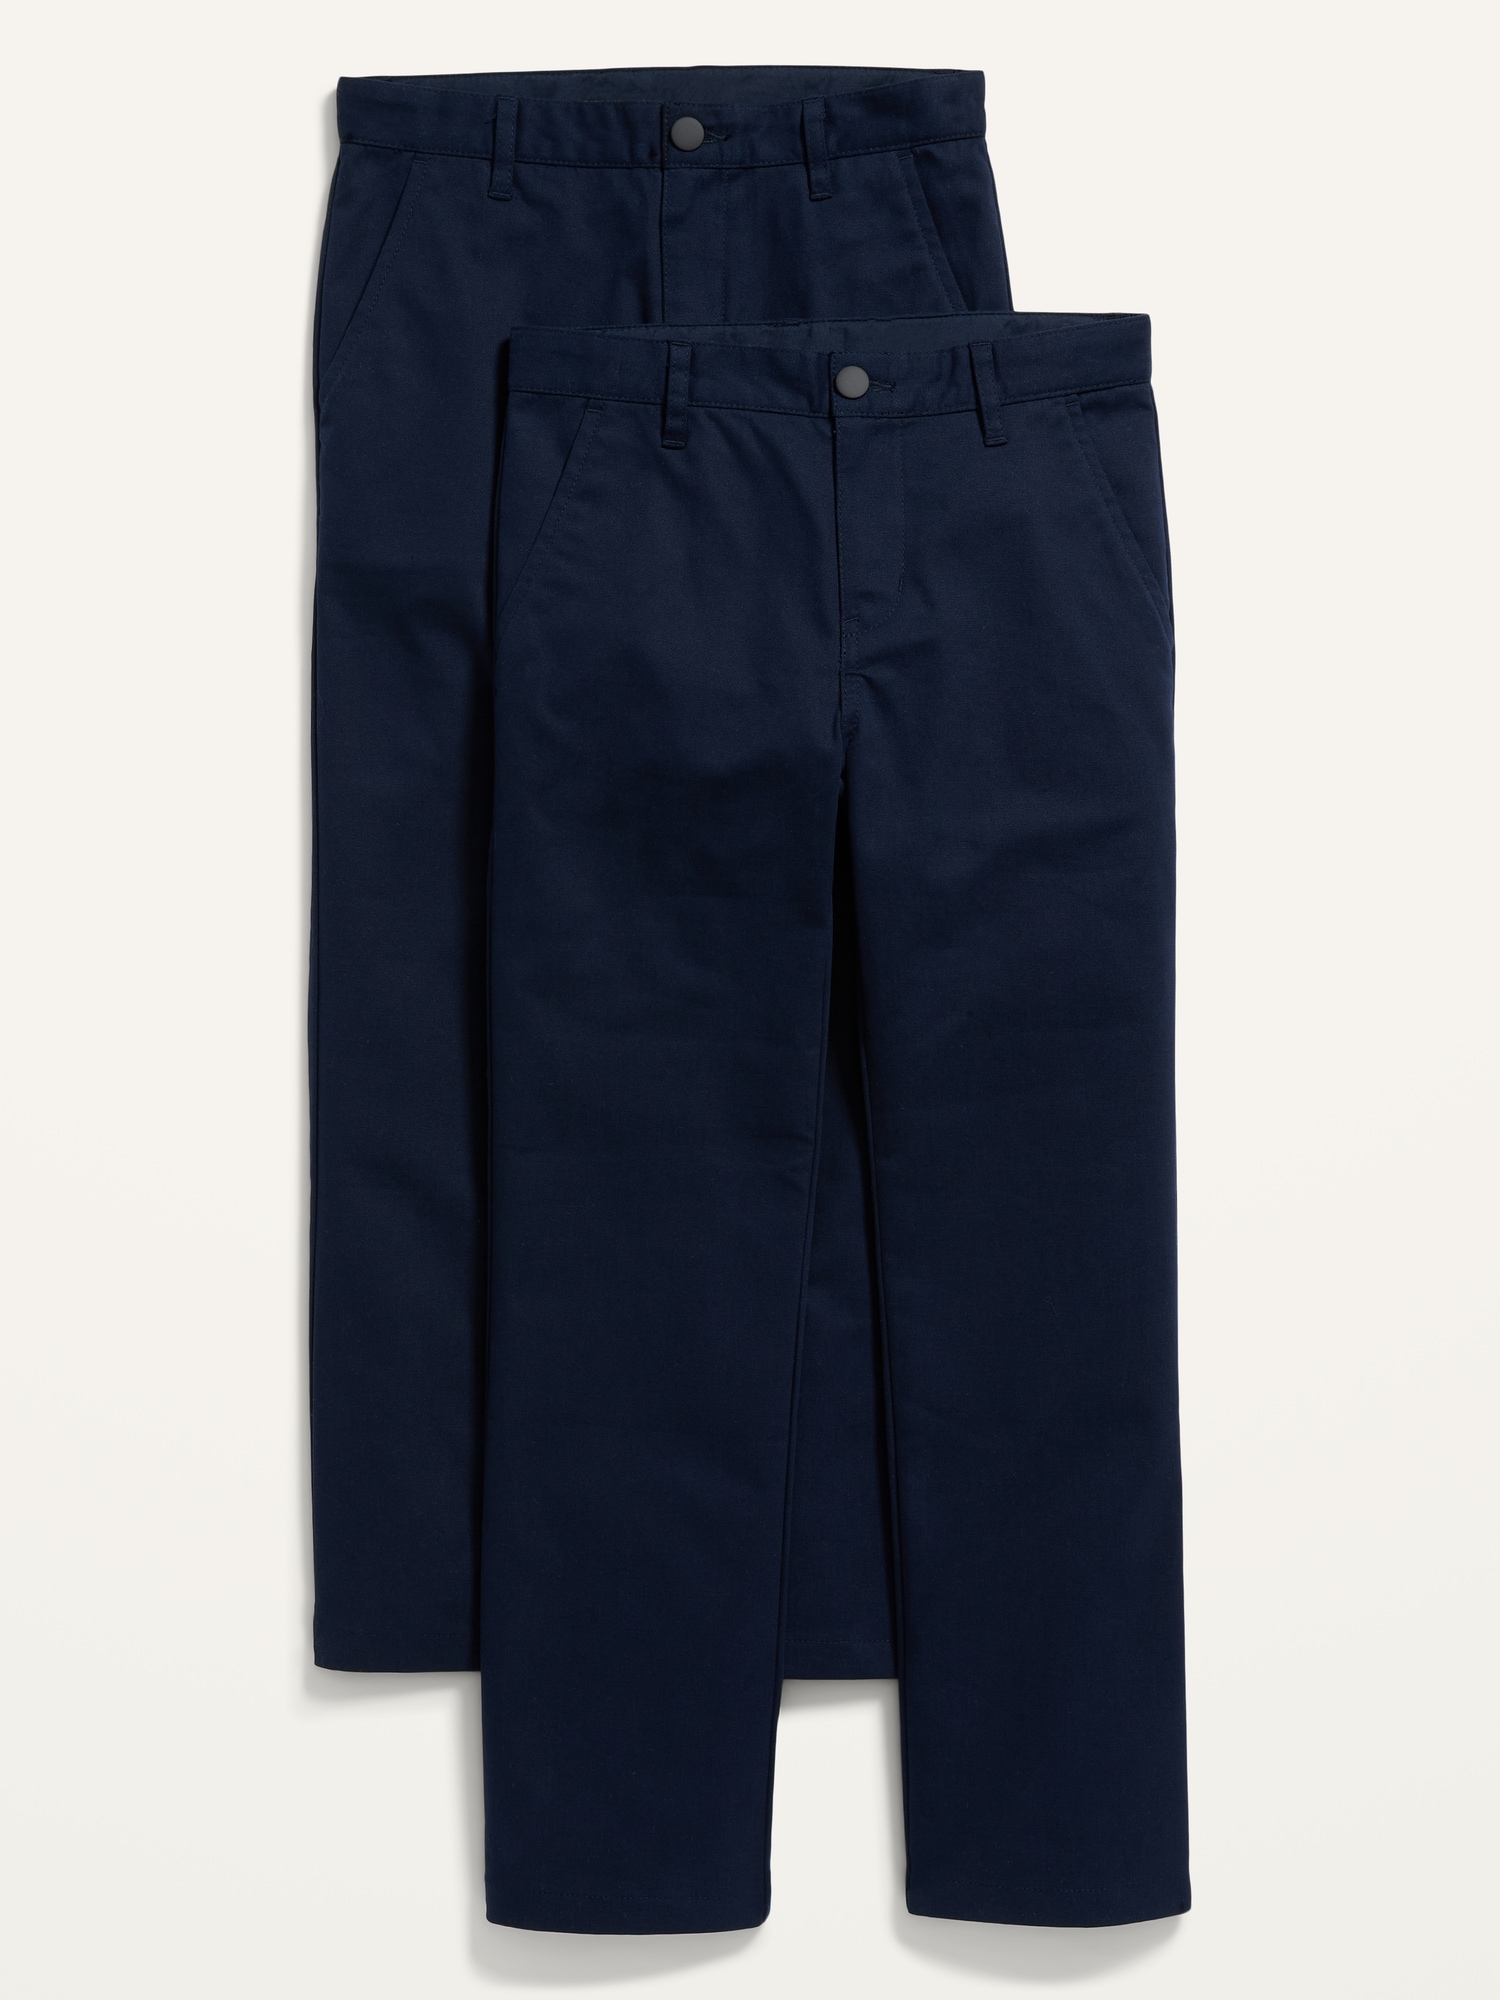 Old Navy Uniform Straight Pants 2-Pack For Boys blue - 875595022